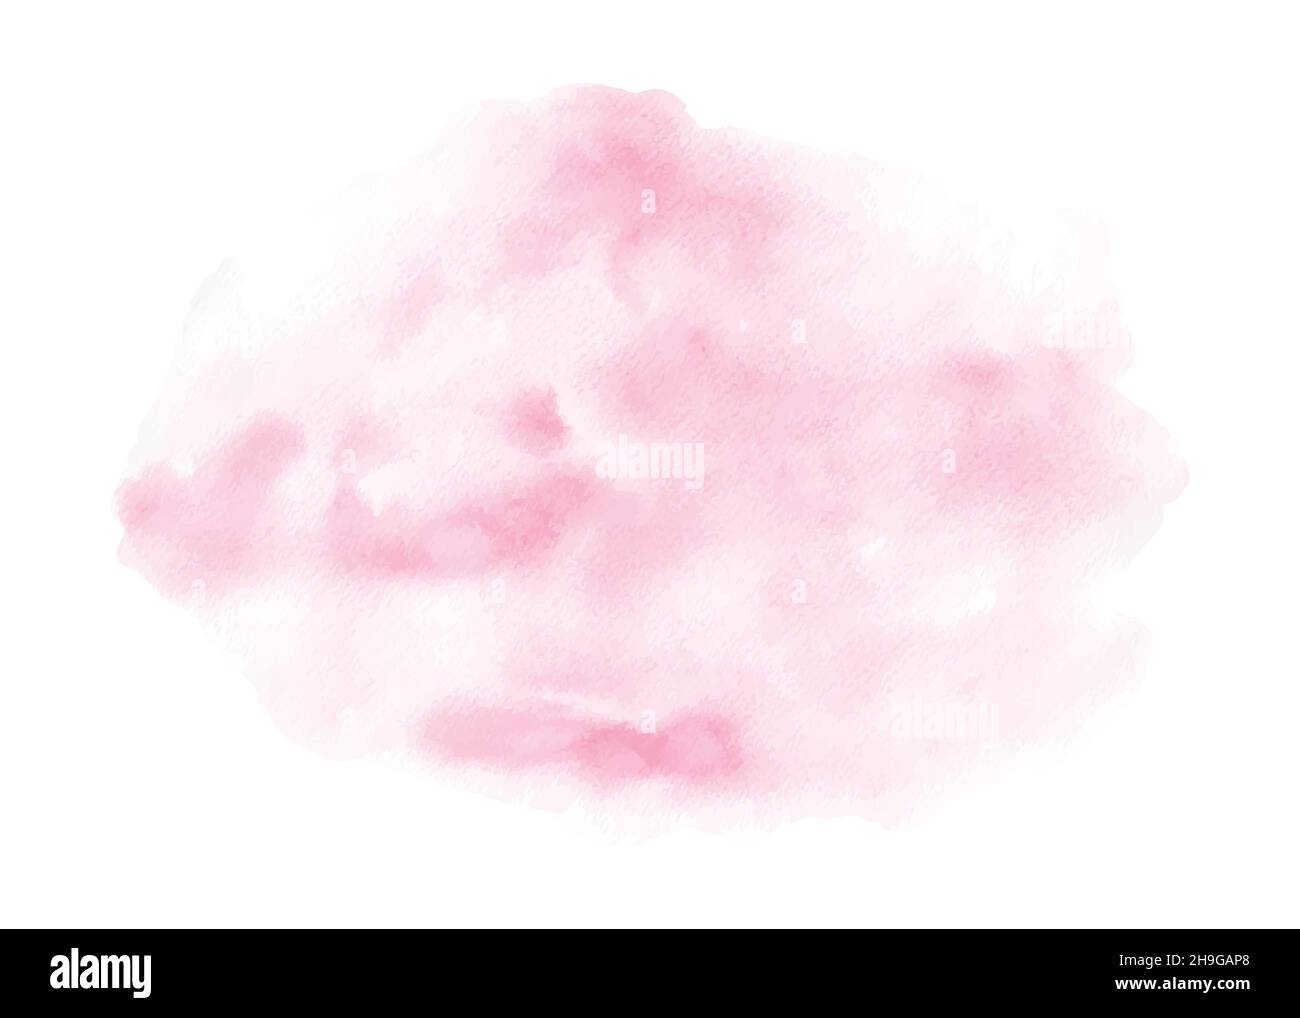 Abstract bright pink watercolor shape. Stains artistic vector used as being an element in the decorative background design of header, brochure, poster Stock Vector